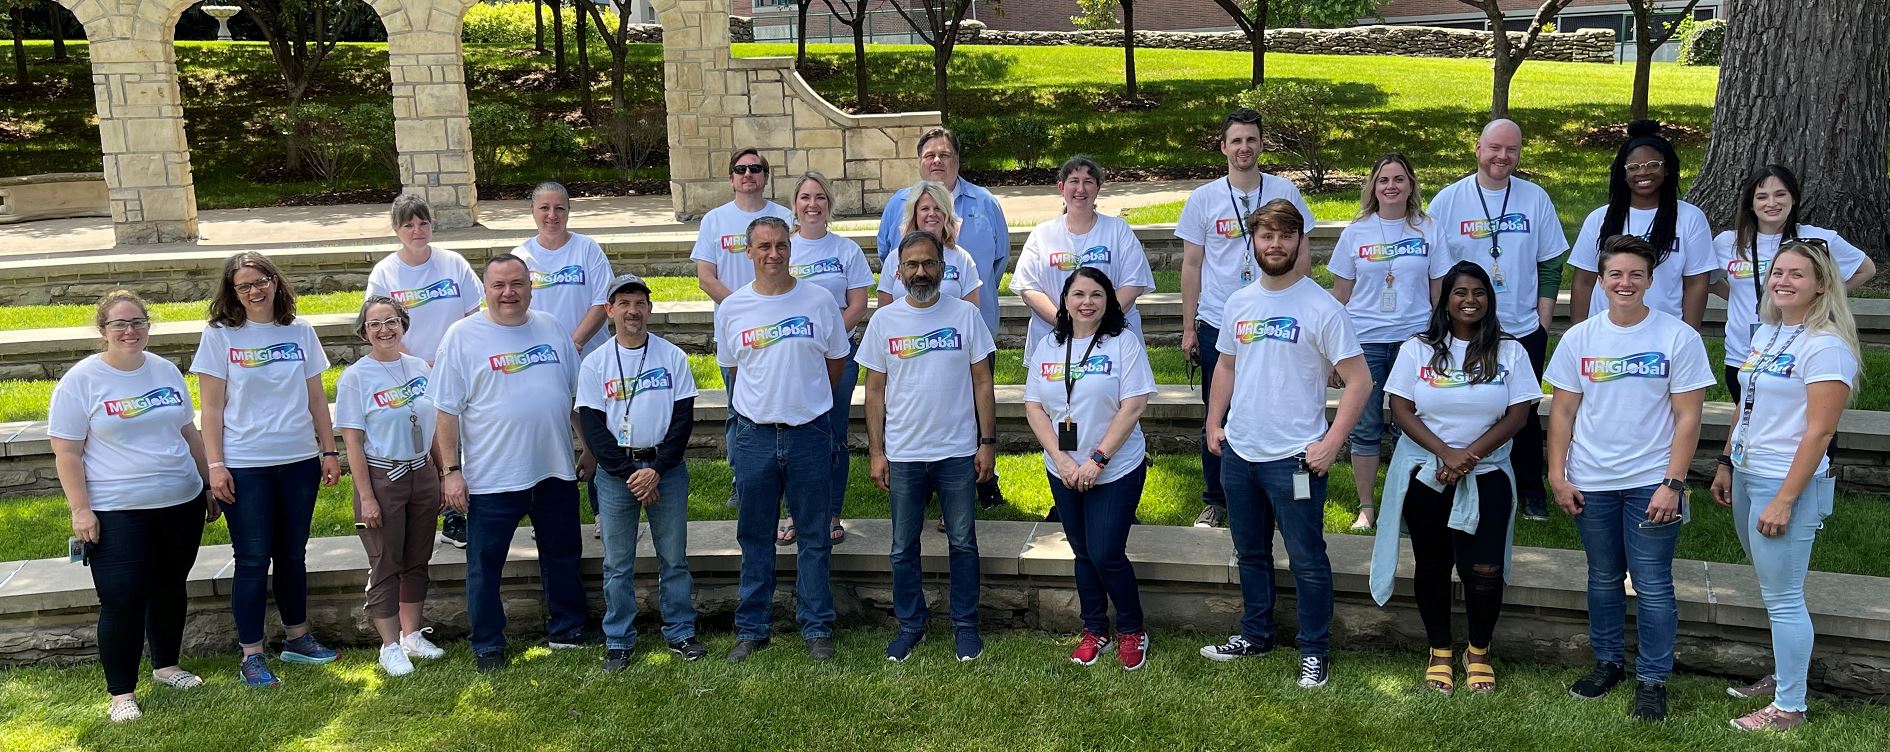 MRIGlobal Staff standing outside with Pride Shirts on